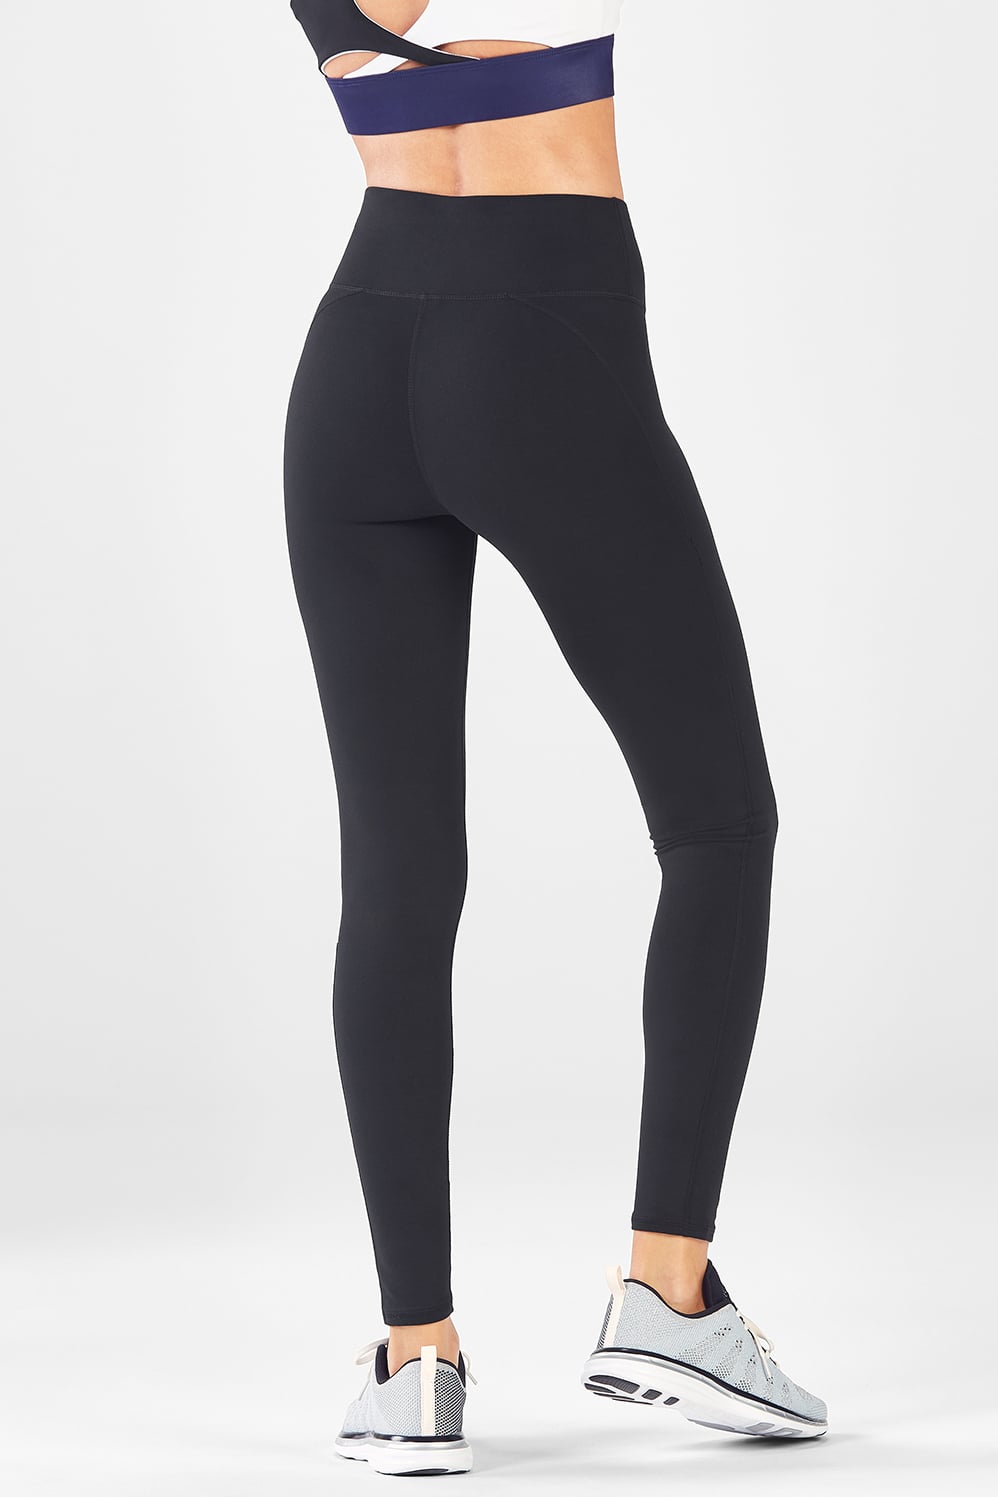 19 Best Workout Leggings Brands For Every Type Of Exercise – 2023 | Best  running leggings, Running leggings, Outfits with leggings